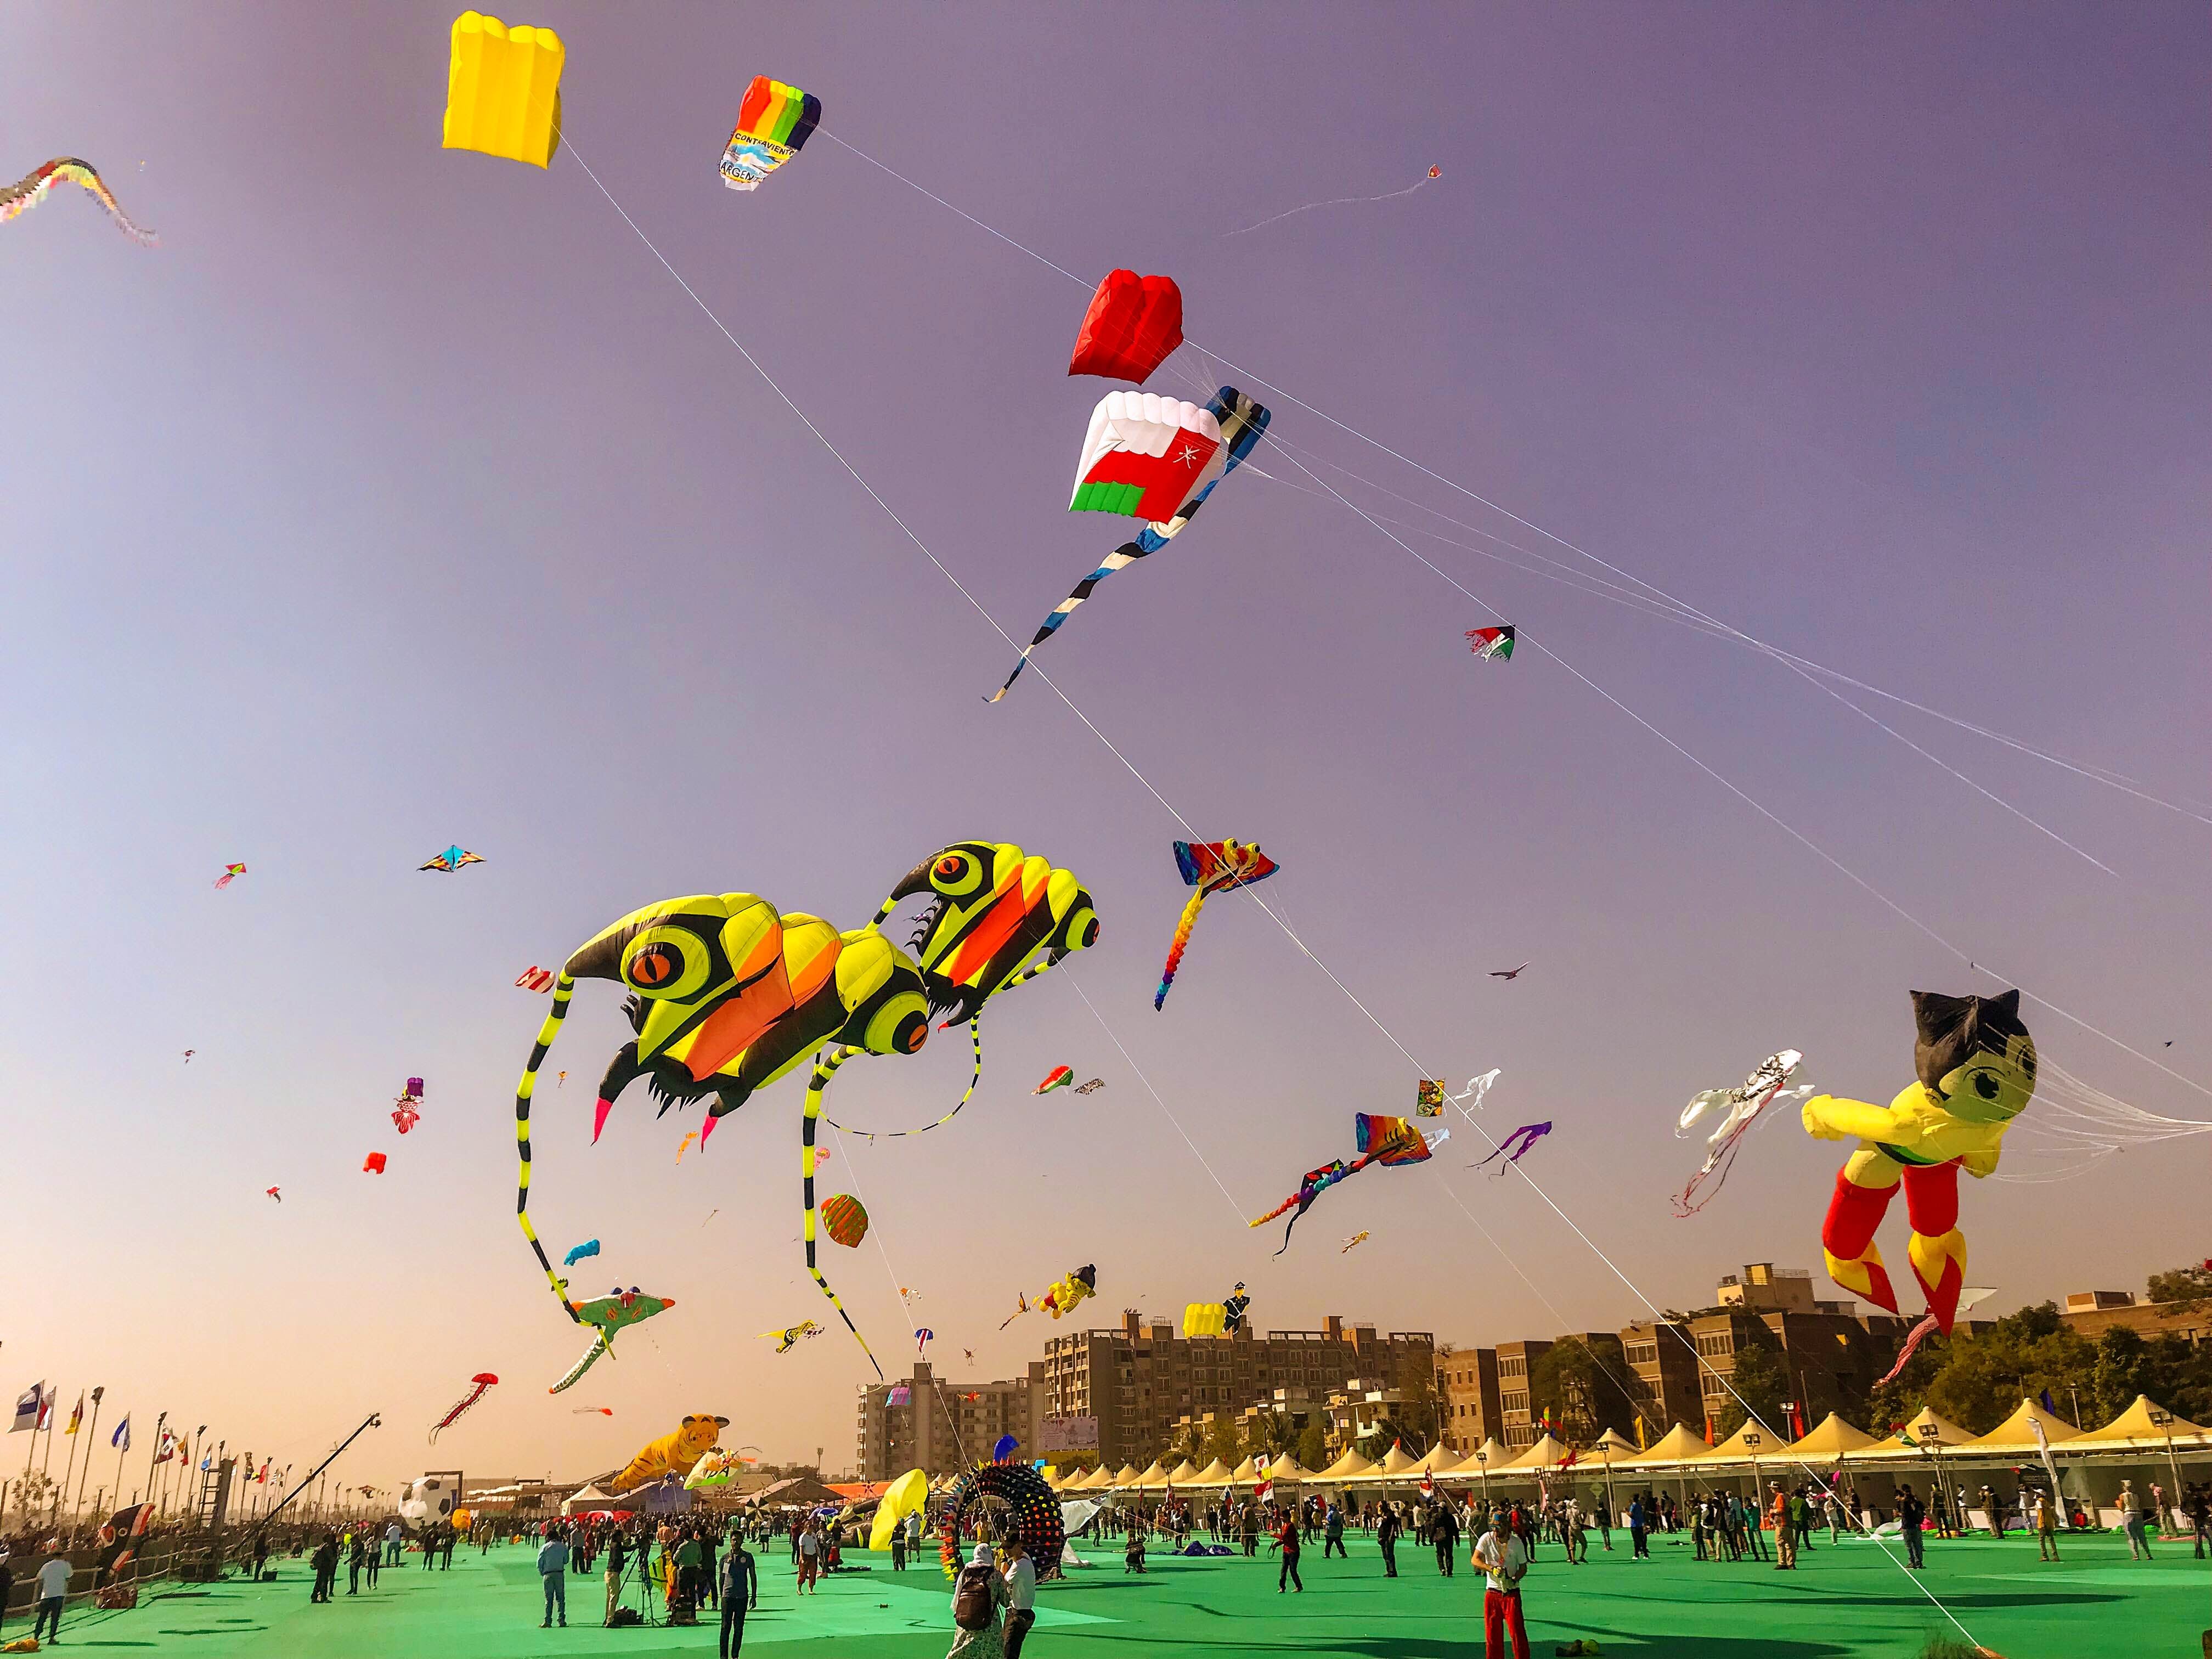 Kite,Kite sports,Fun,Sky,Sport kite,Wind,Games,Windsports,Toy,Competition event